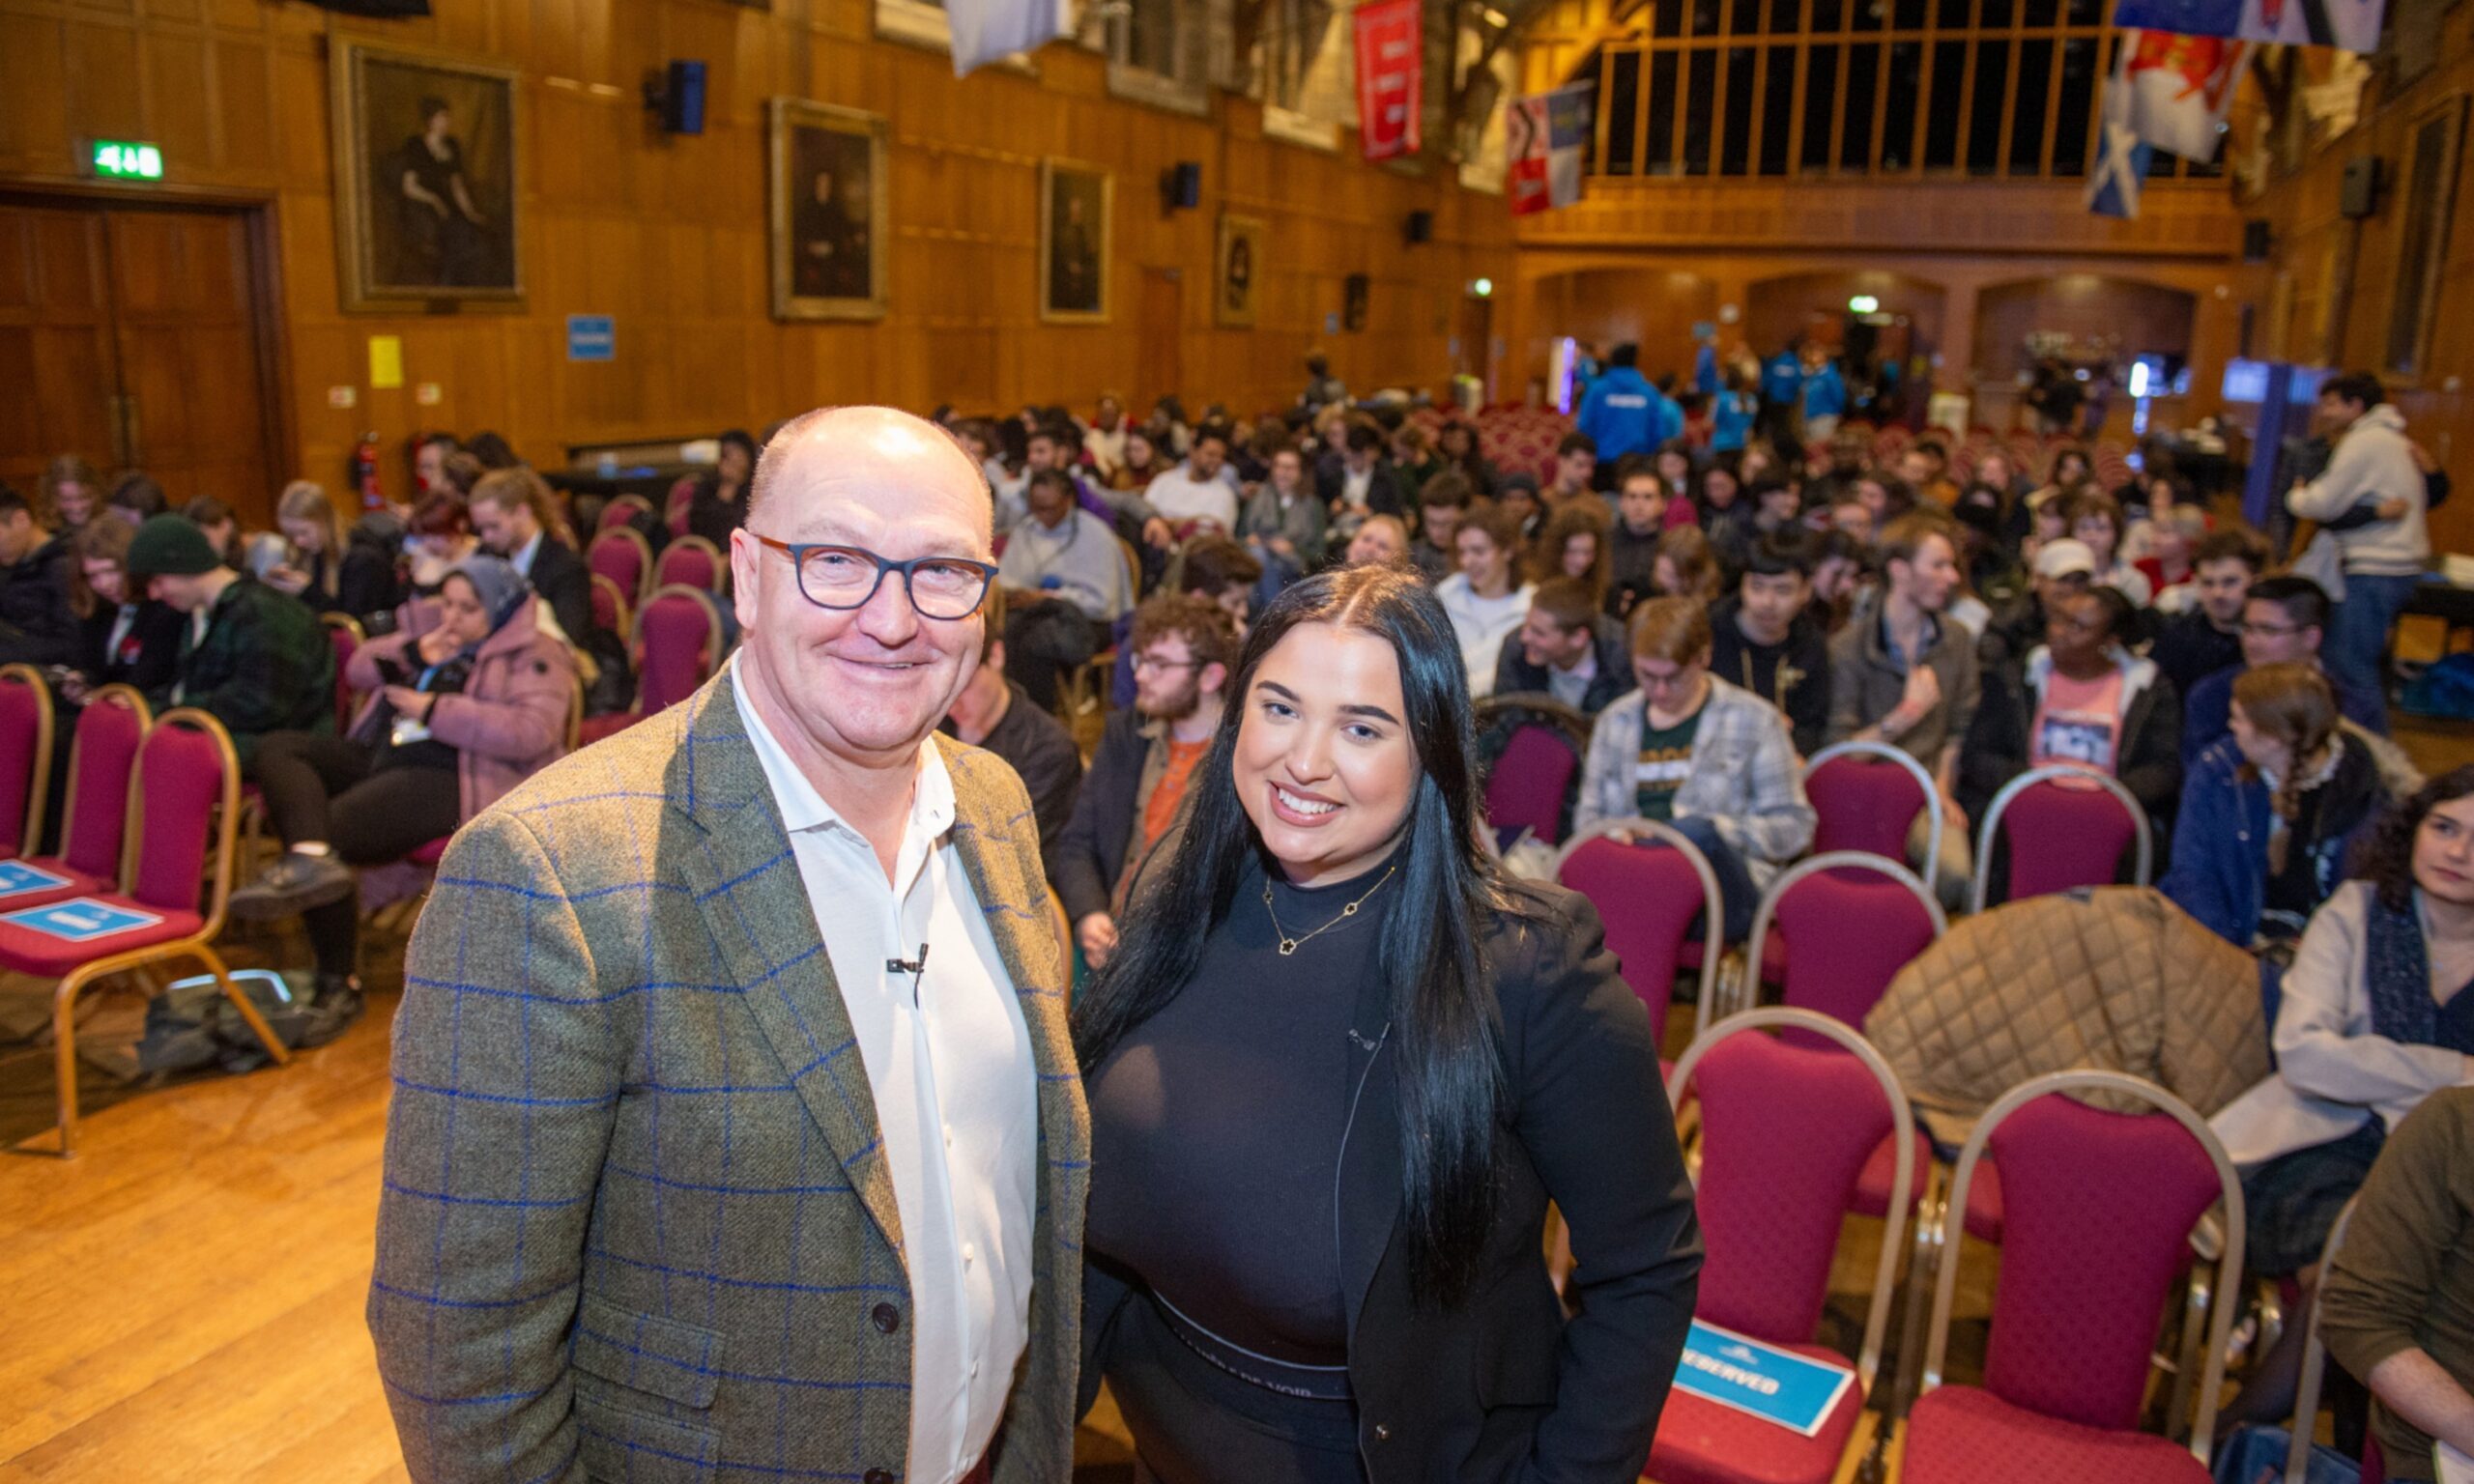 Our Union Street co-founder Derrick Thomson and communications manager Honey Keenan pictured in front of Aberdeen University students at Elphinstone Hall.